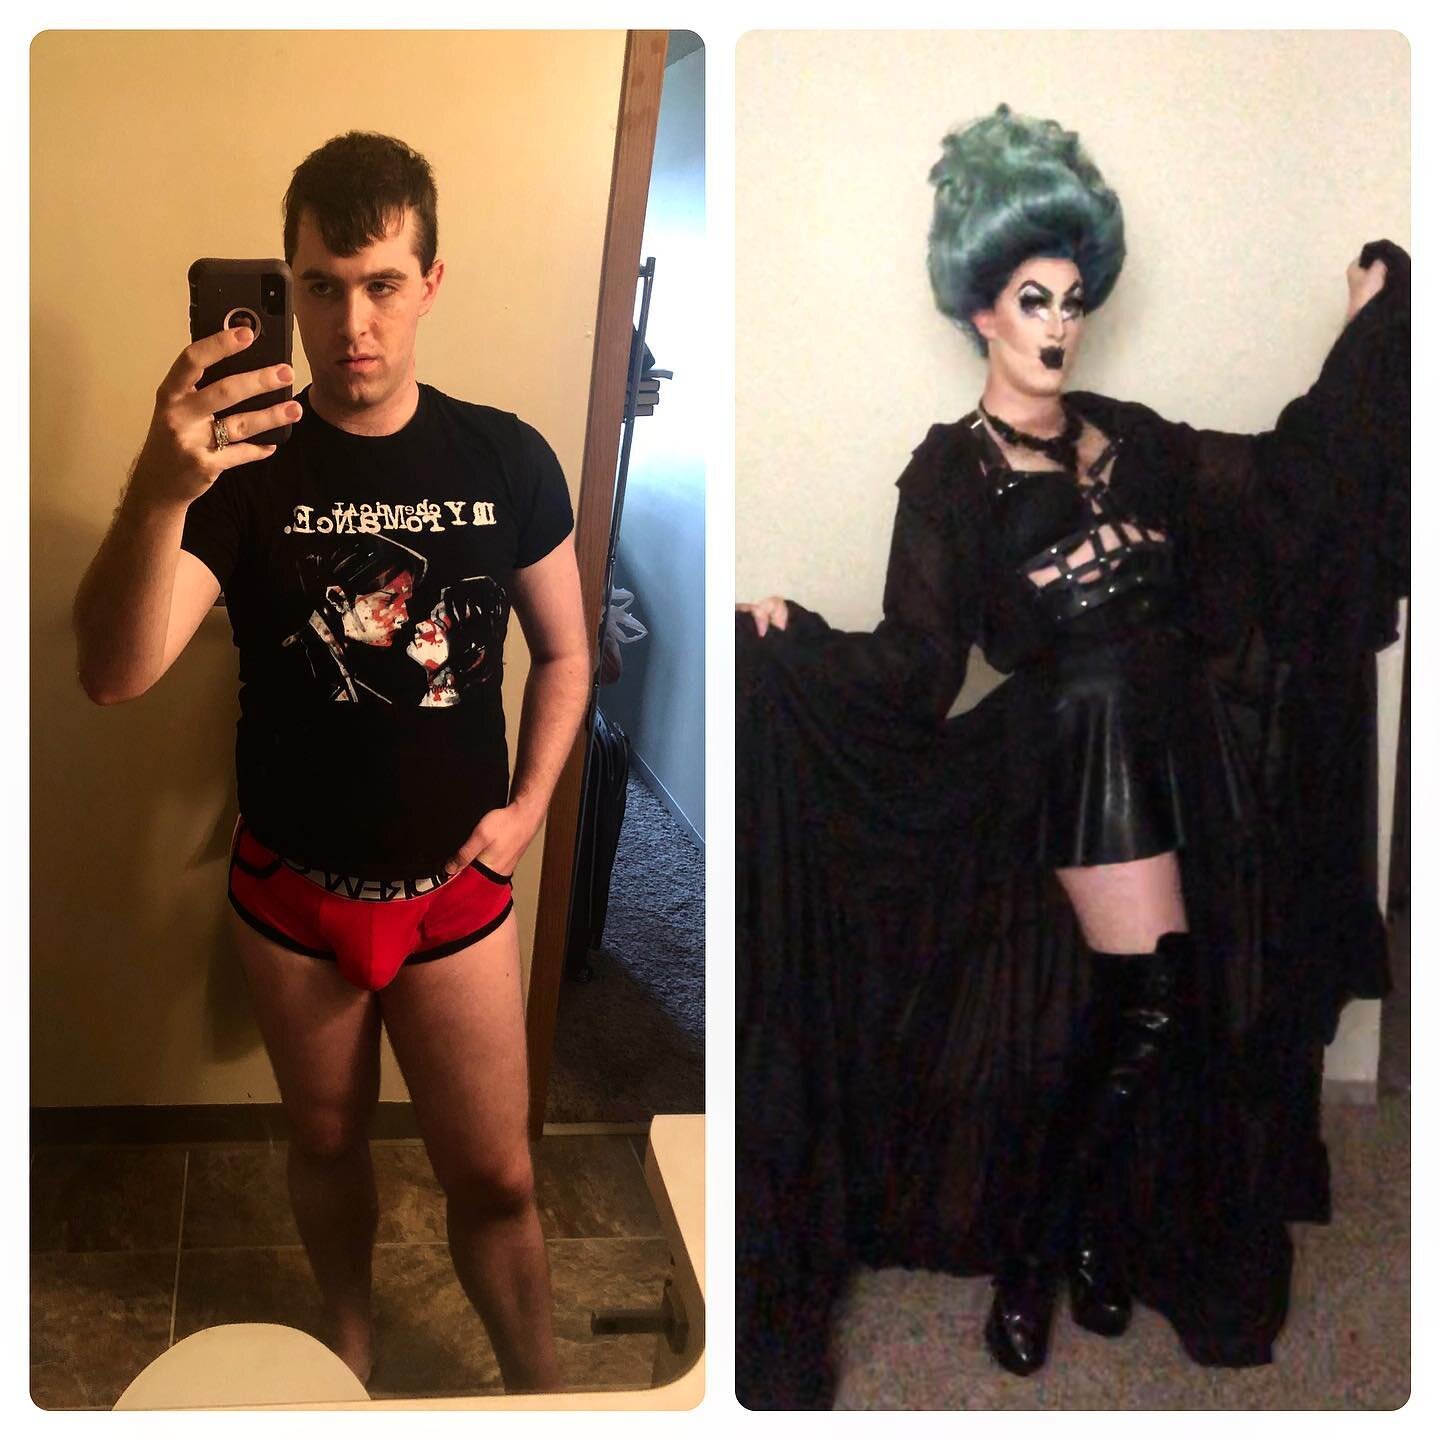 I&rsquo;ll do a #transformationtuesday when i #feellikeit! On the left we have &ldquo;this underwear has pockets!&rdquo; On the right we have my family friendly version of Hades for a digital all ages drag show. Get yourself a queen who can do both i